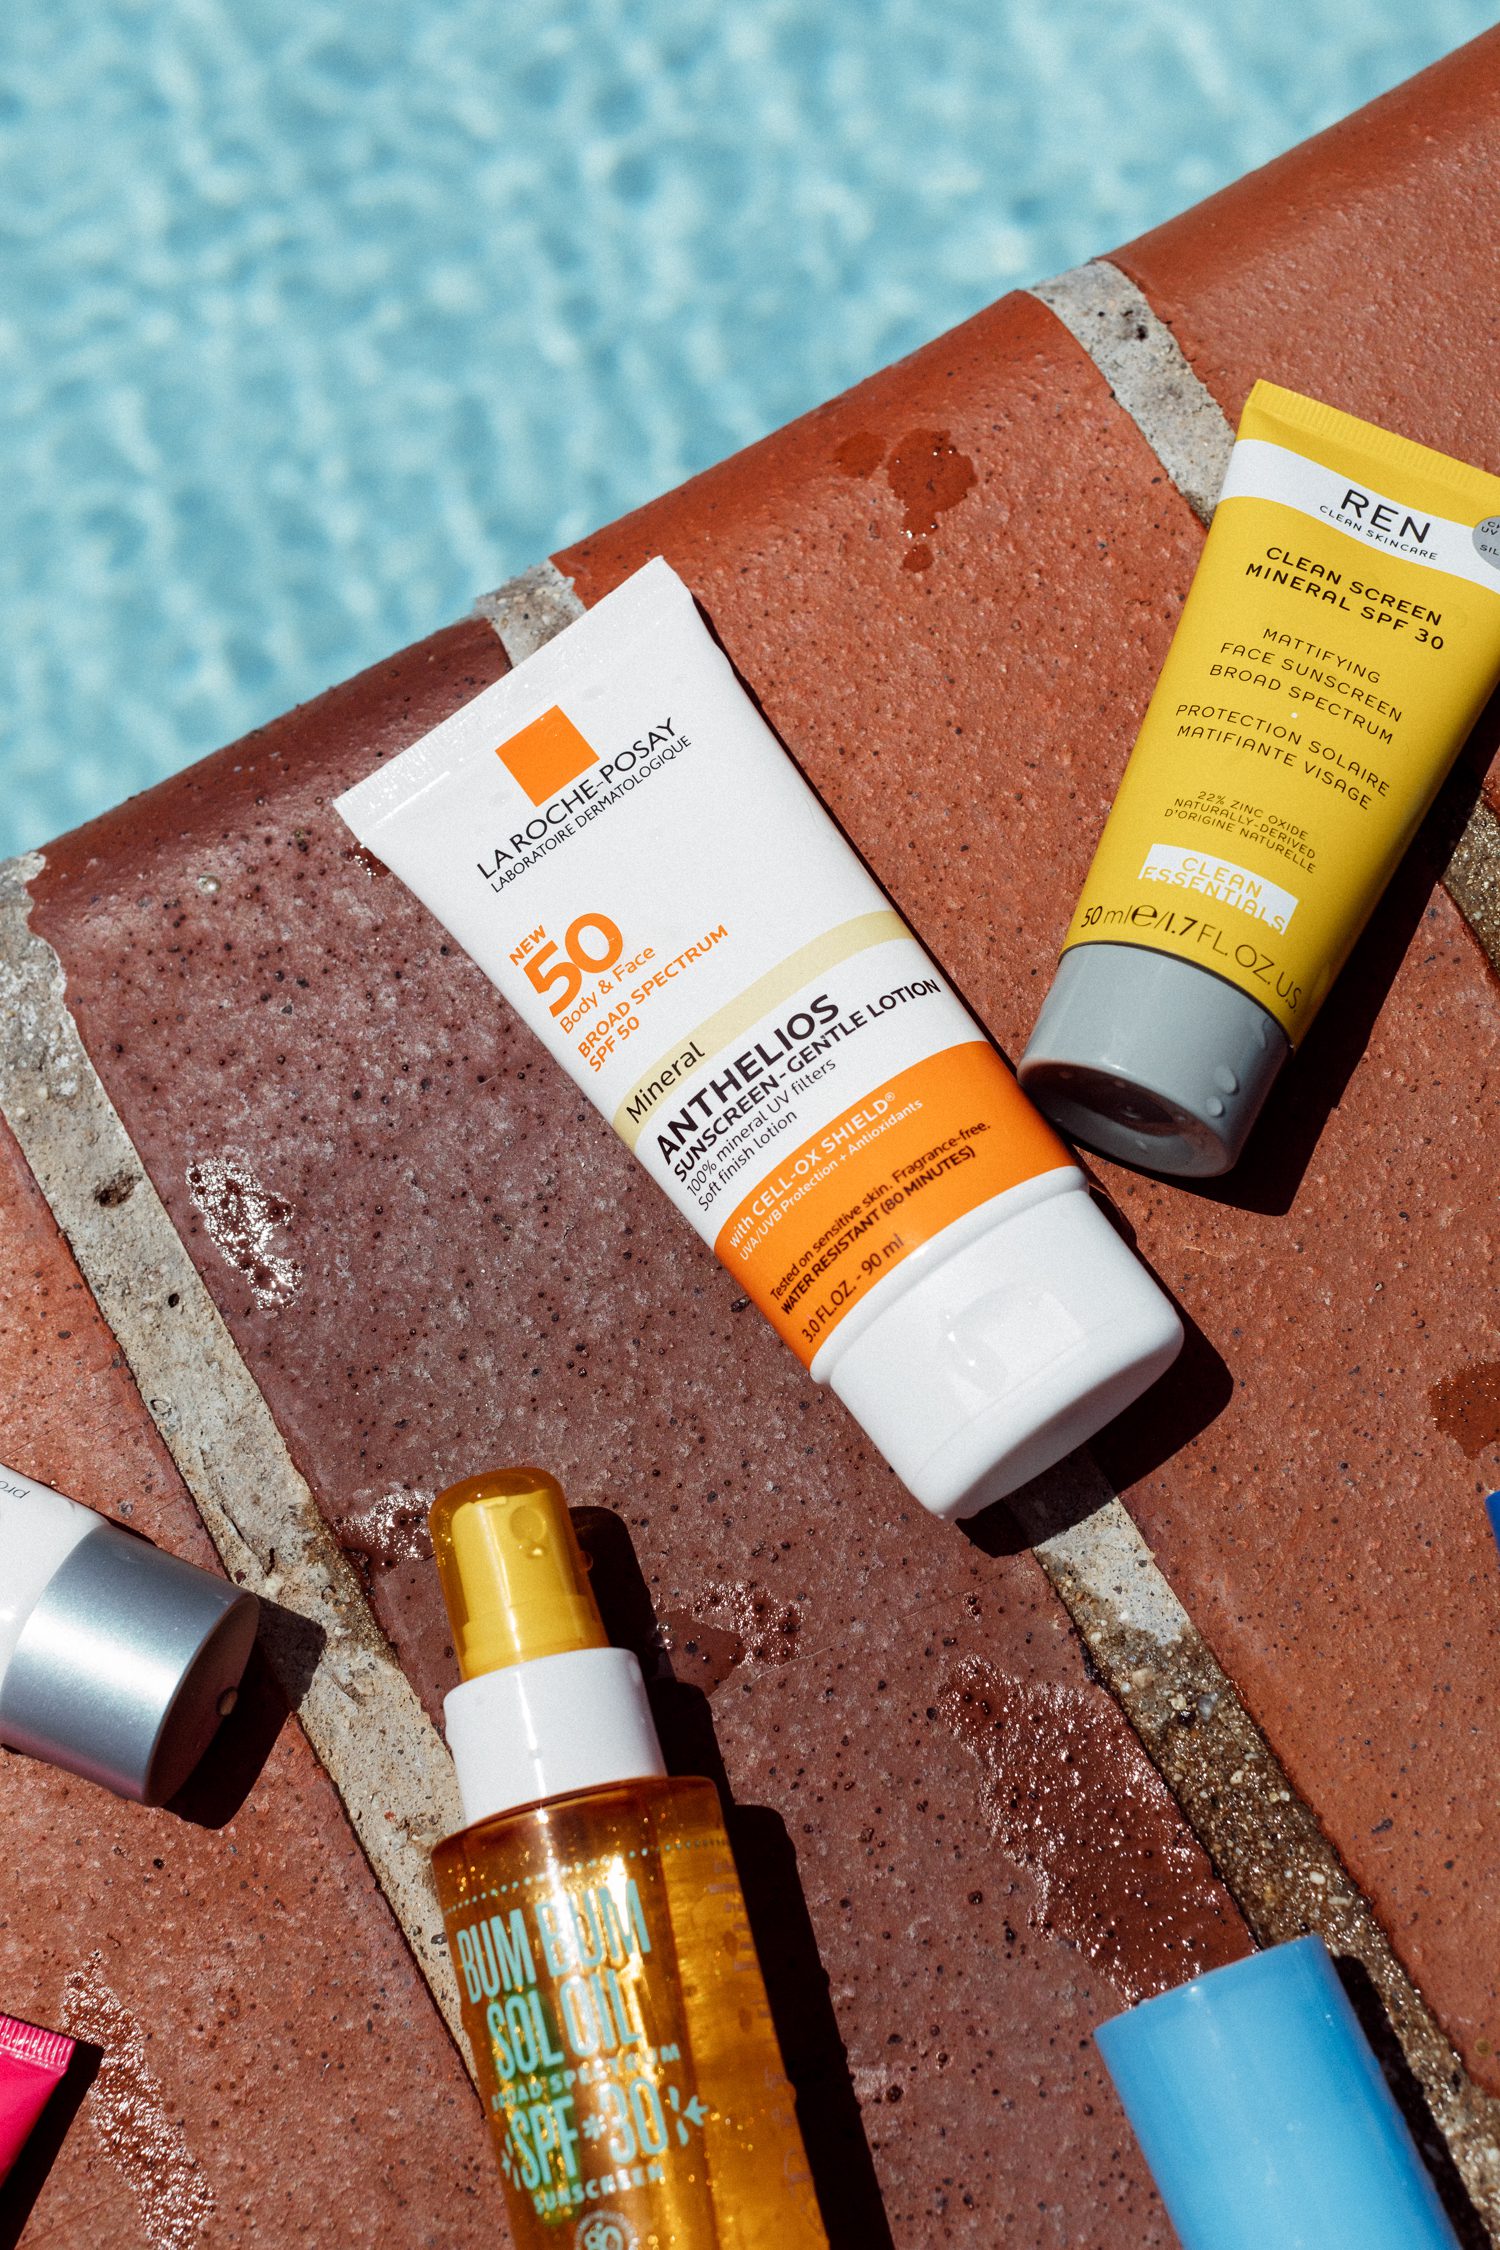 Mineral-based sunscreens are best for sensitive skin